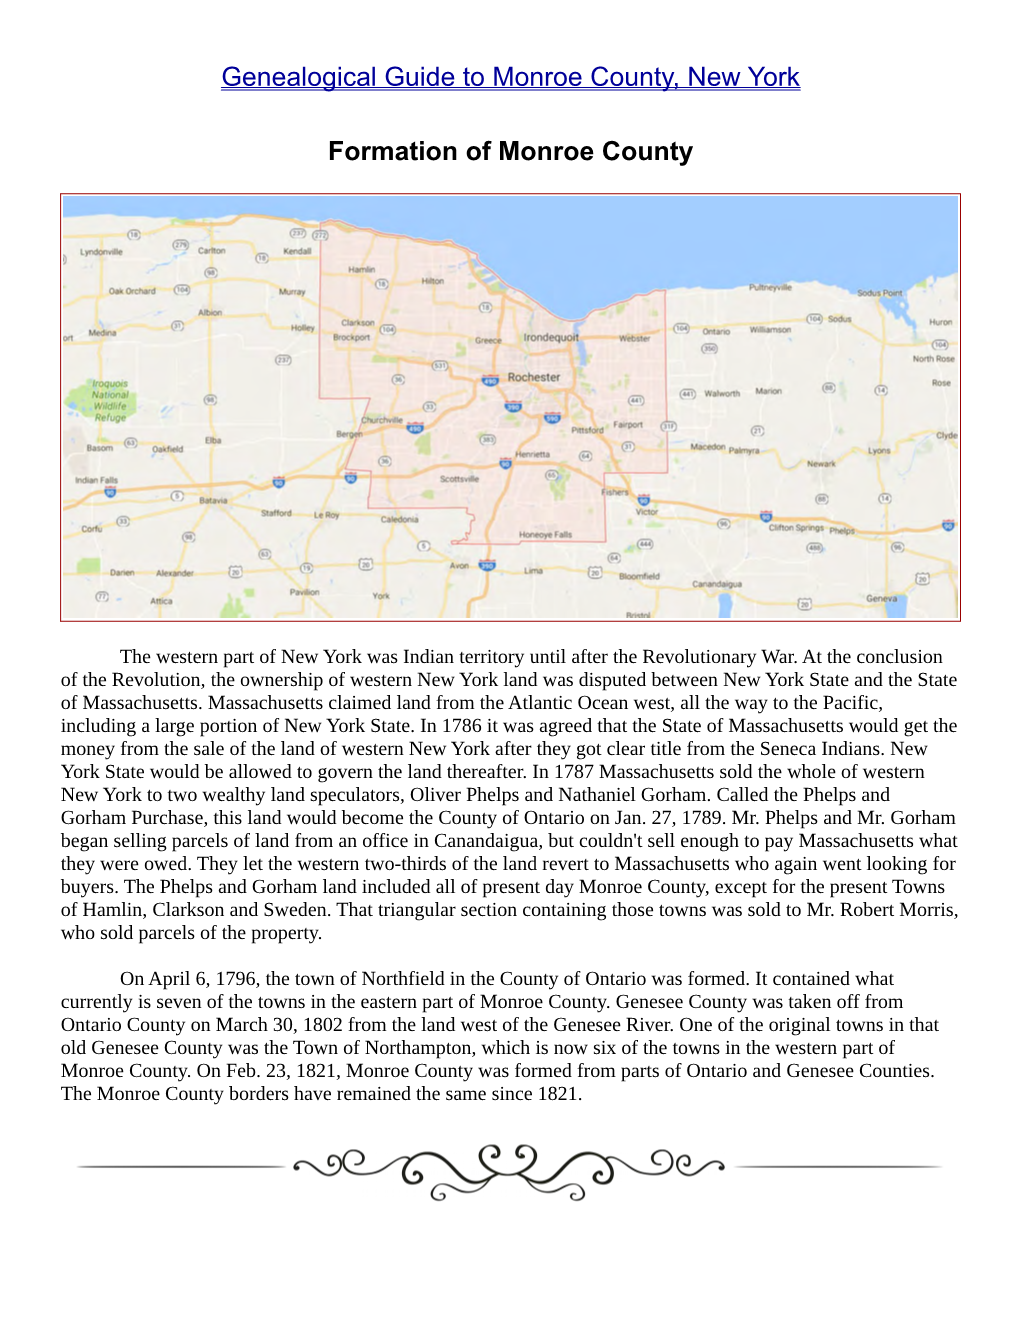 Genealogical Guide to Monroe County, NY